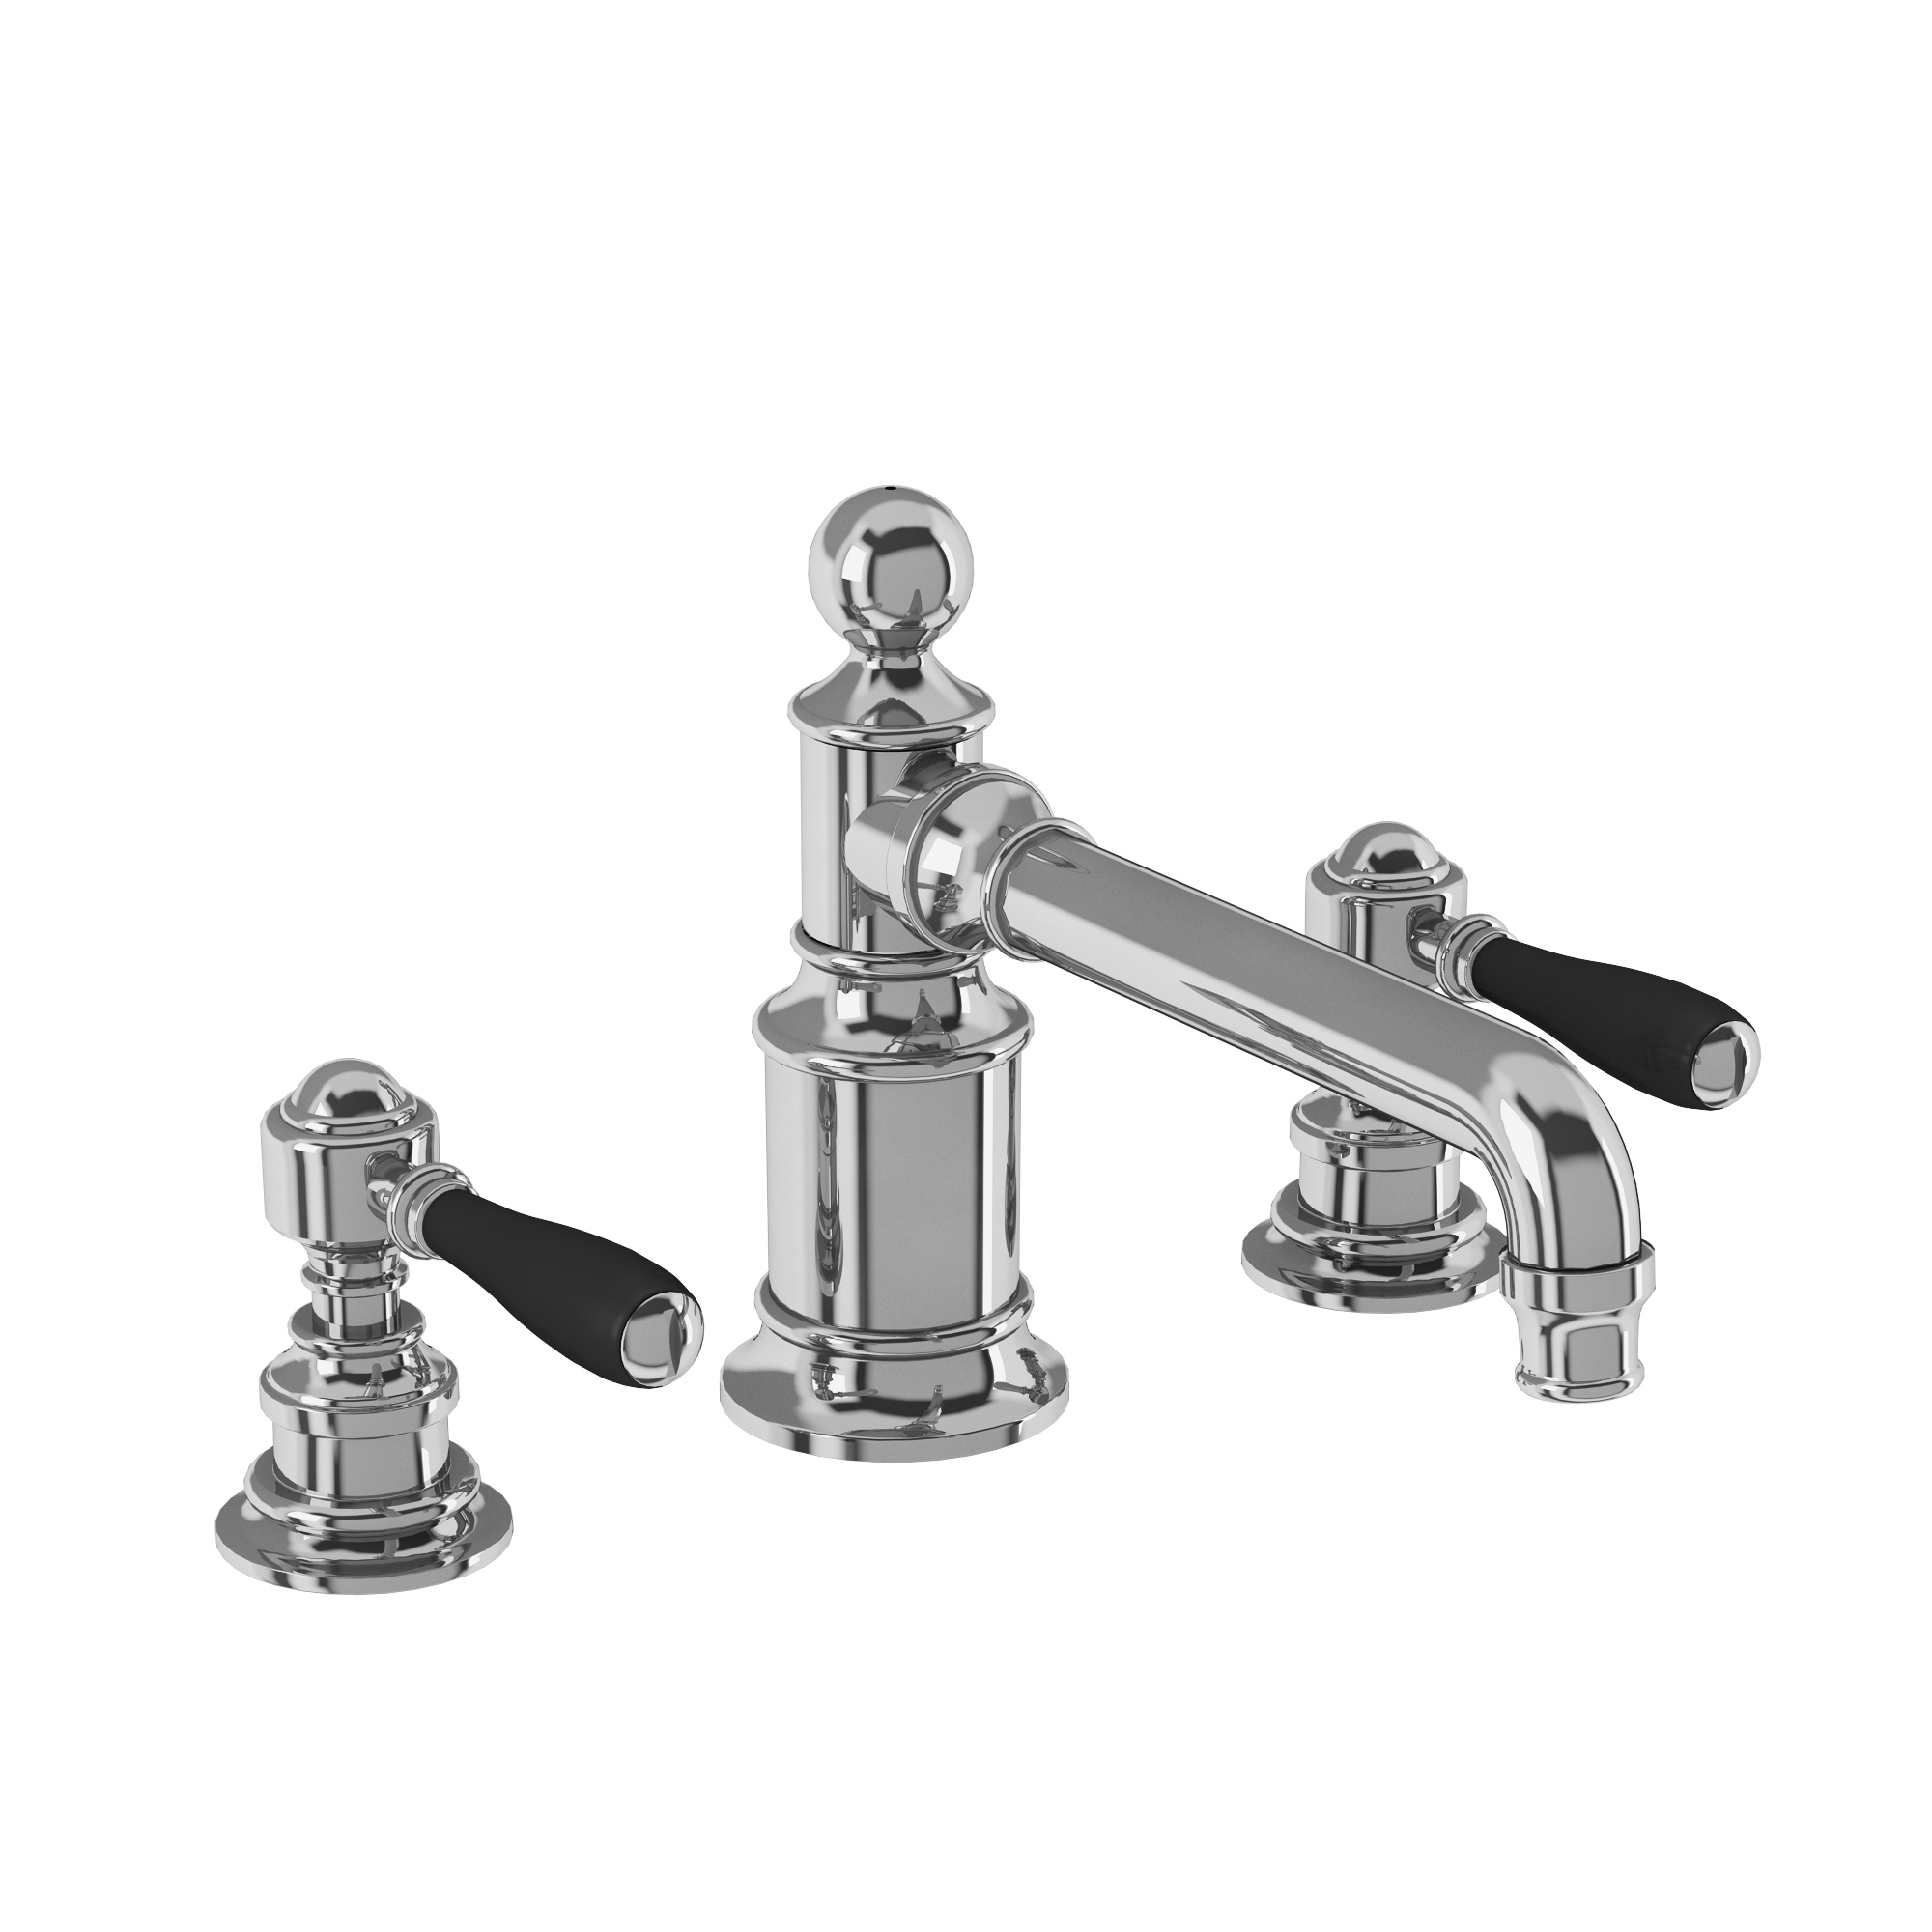 Arcade Three hole basin mixer deck-mounted without pop up waste - chrome - with black lever